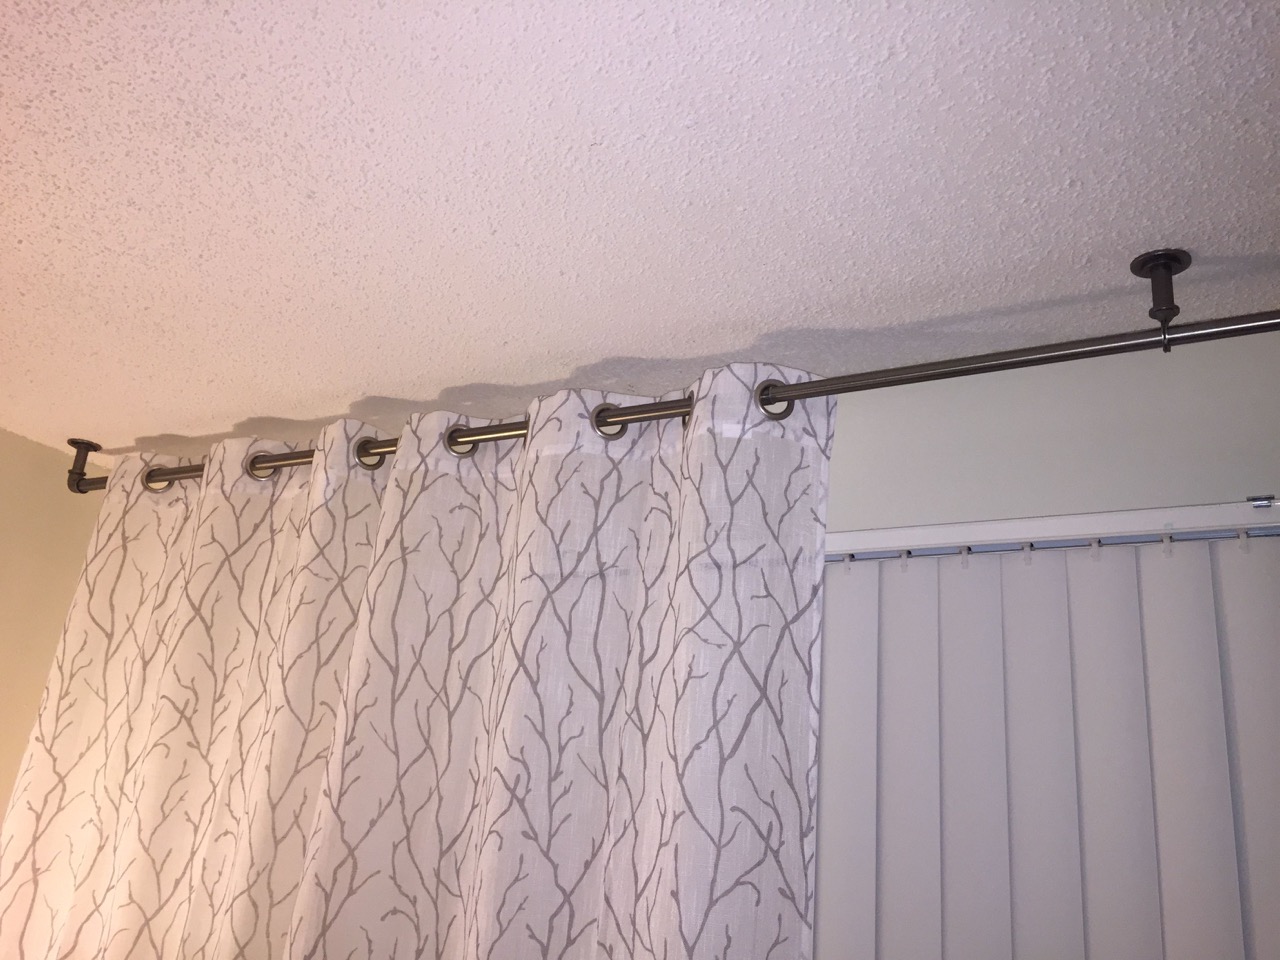 How Far From Ceiling To Hang Curtains